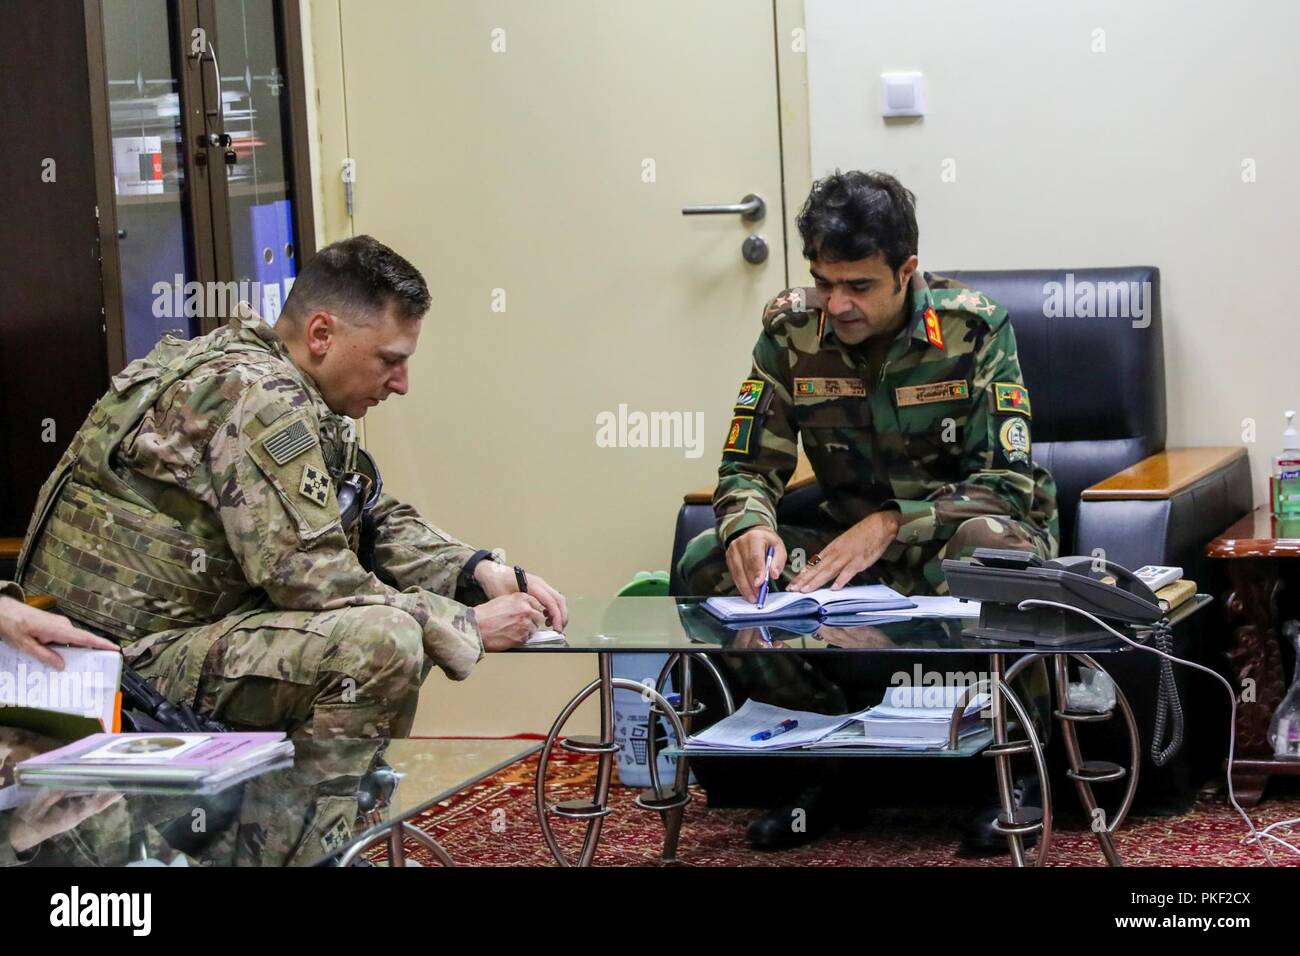 KANDAHAR PROVINCE, Afghanistan (August 5, 2018) -- U.S. Army 1st Lt. Steven Bettger, left, Train, Advise and Assist Command-South medical advisor, and Afghan Lt. Col Momand K., Kandahar Regional Military Hospital acting commander, exchange notes, August 5, 2018, during a medical advisory visit at Camp Hero in Kandahar, Afghanistan. Bettger and staff members from the Kandahar Airfield NATO Role III Multinational Medical Unit conduct routine visits to KRMH to train and advice Afghan medical staff. Stock Photo